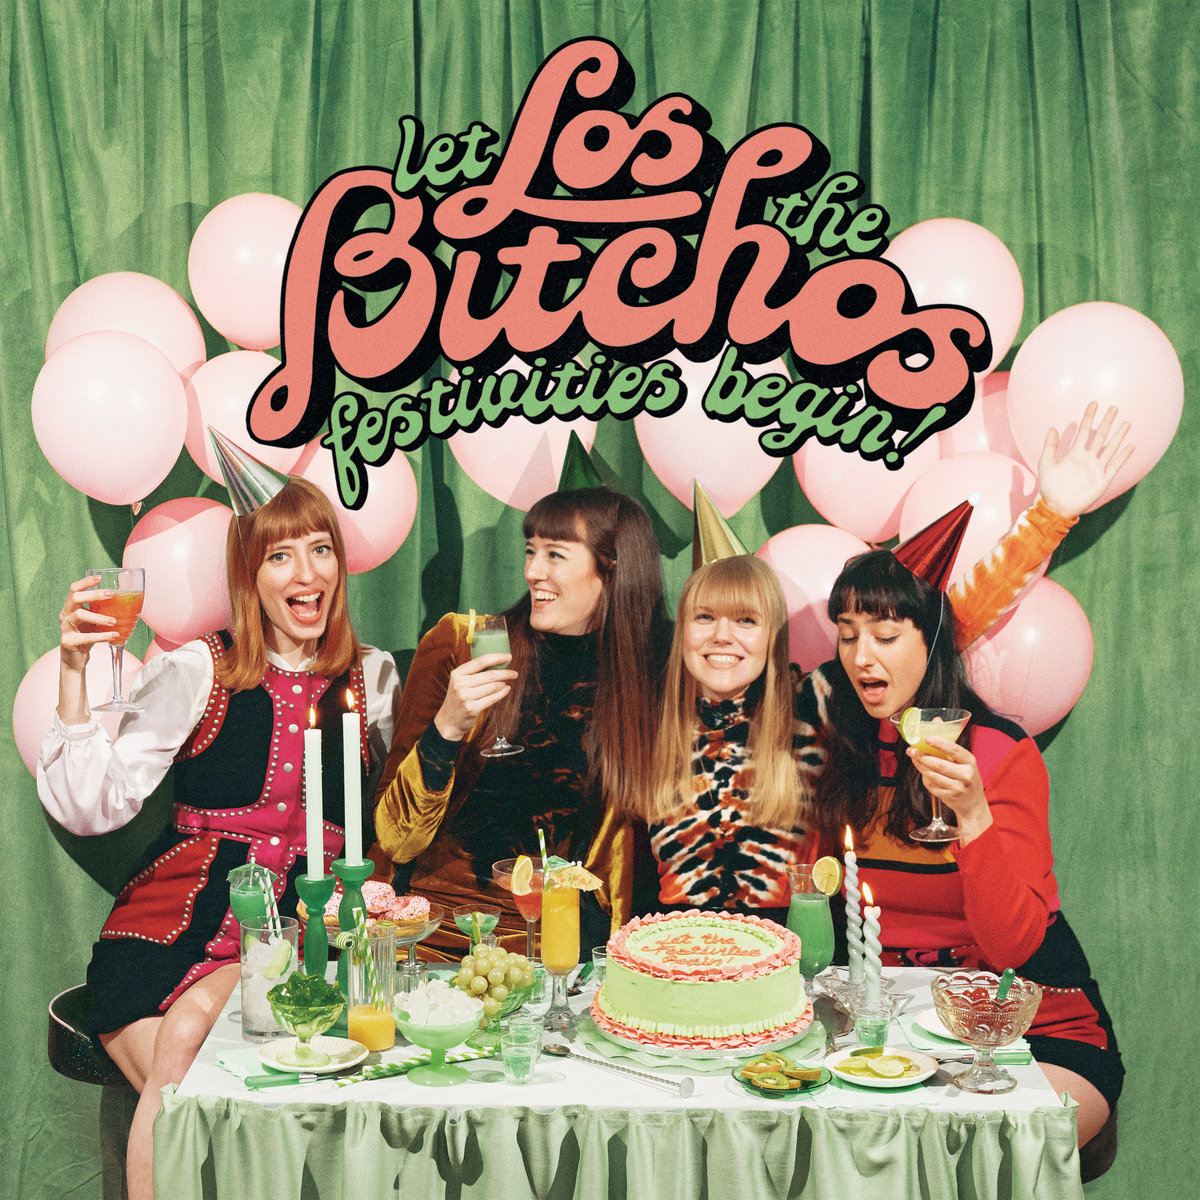 RECORD OF THE WEEK//Los Bitchos – Let The Festivities Begin